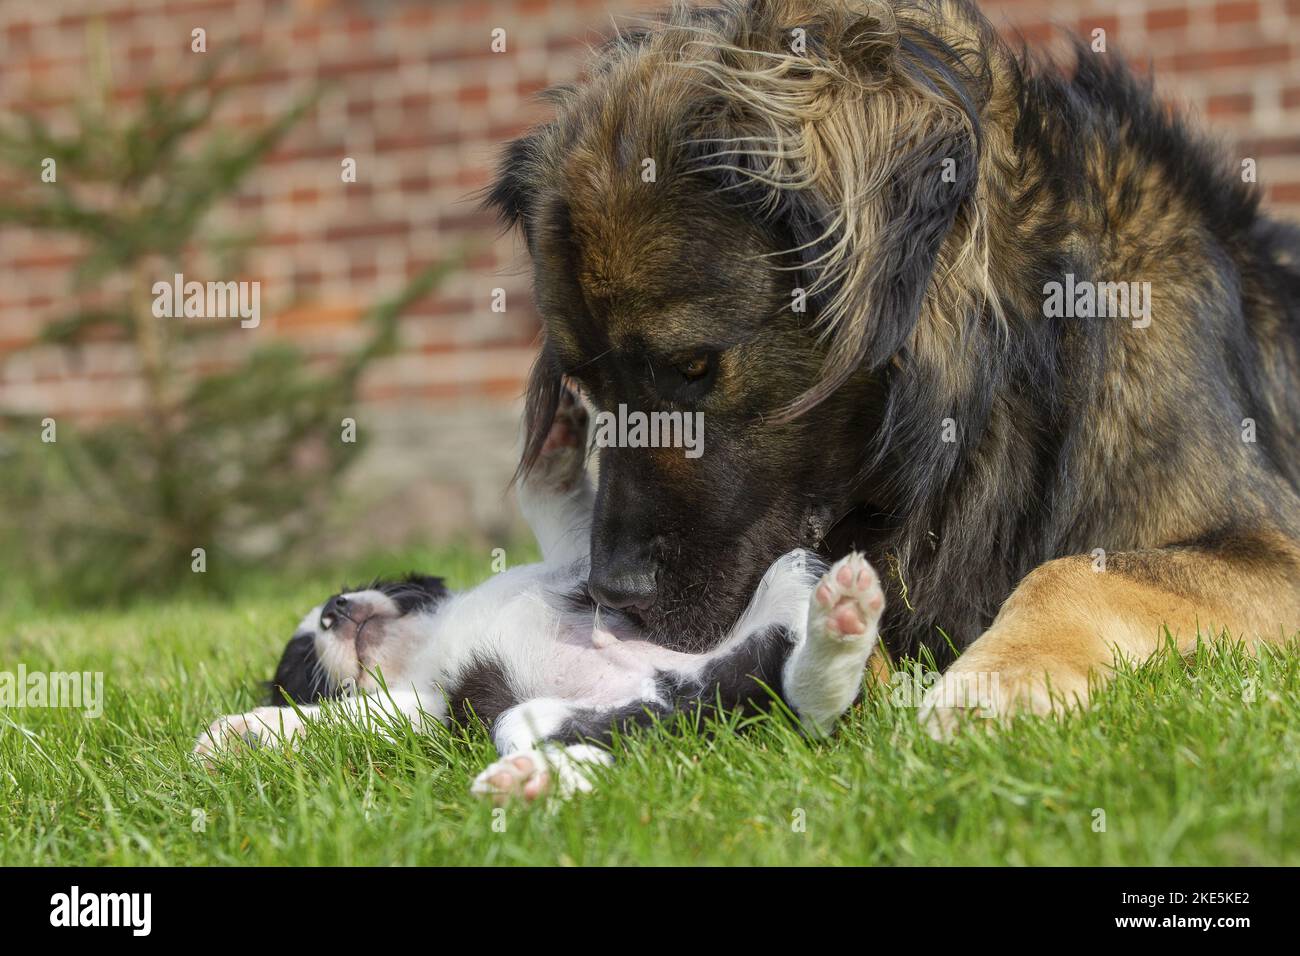 Germanic bear dog with border collie puppy Stock Photo